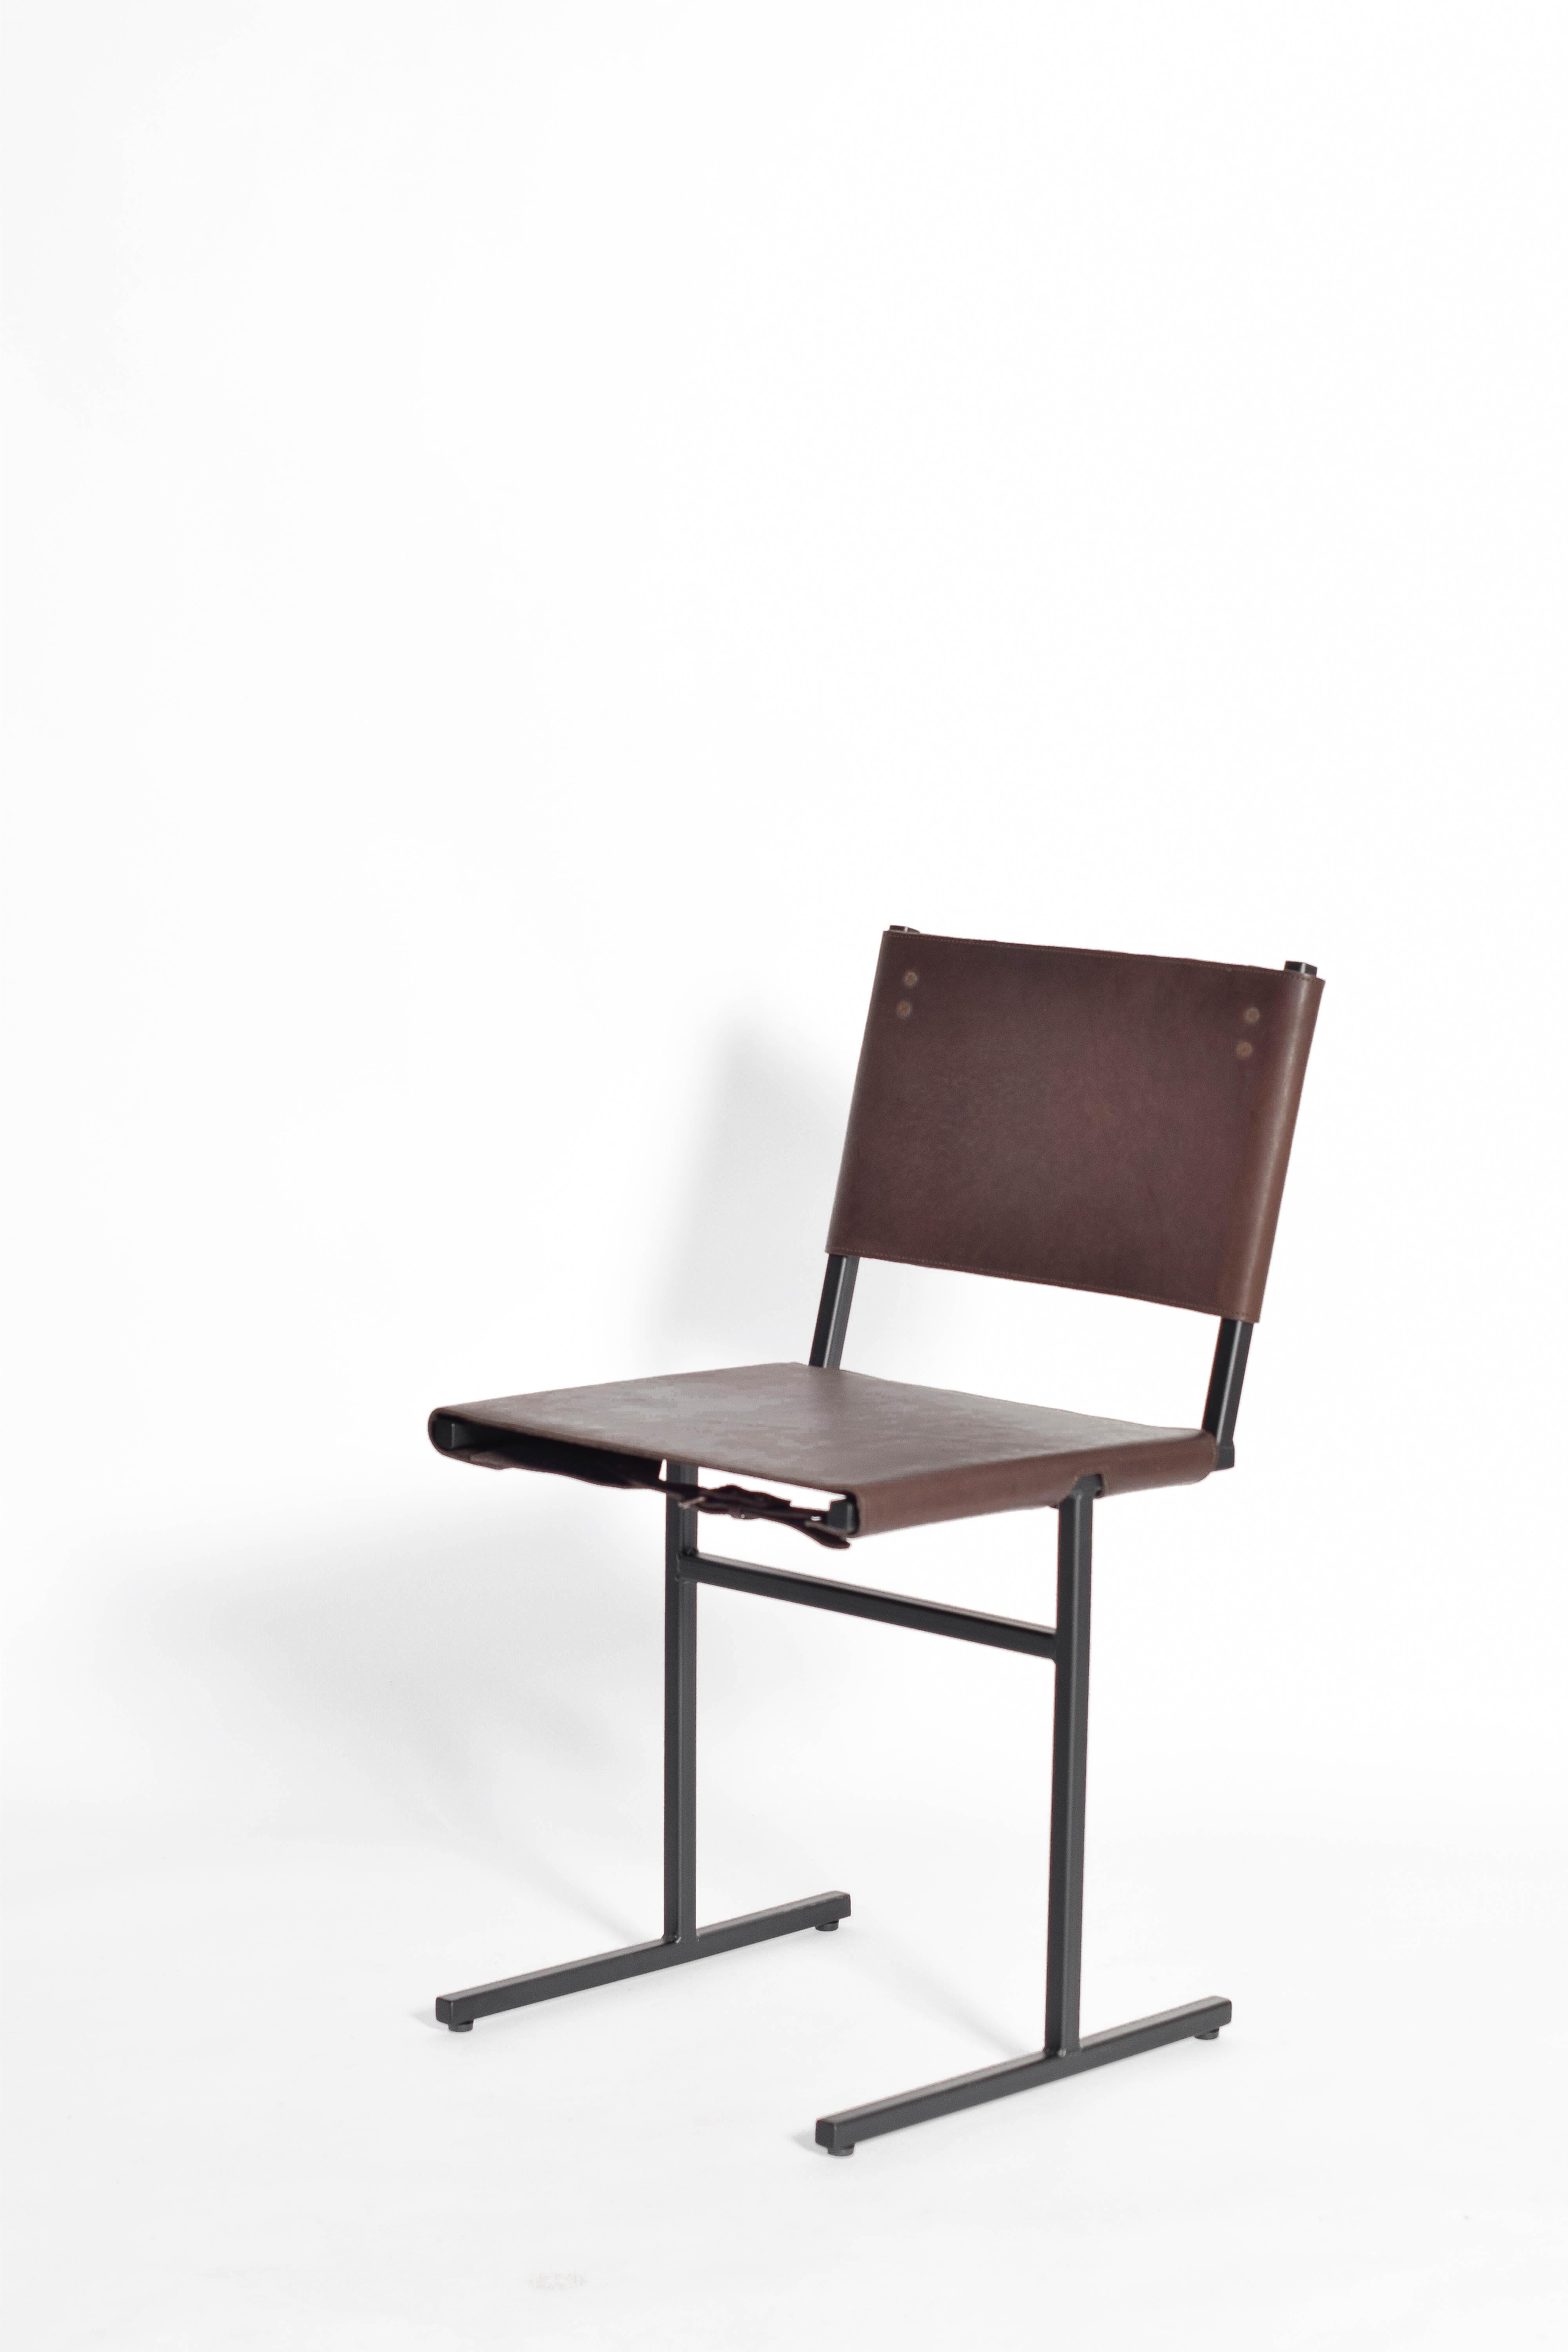 Classic Brown and Brass Memento Chair, Jesse Sanderson 2